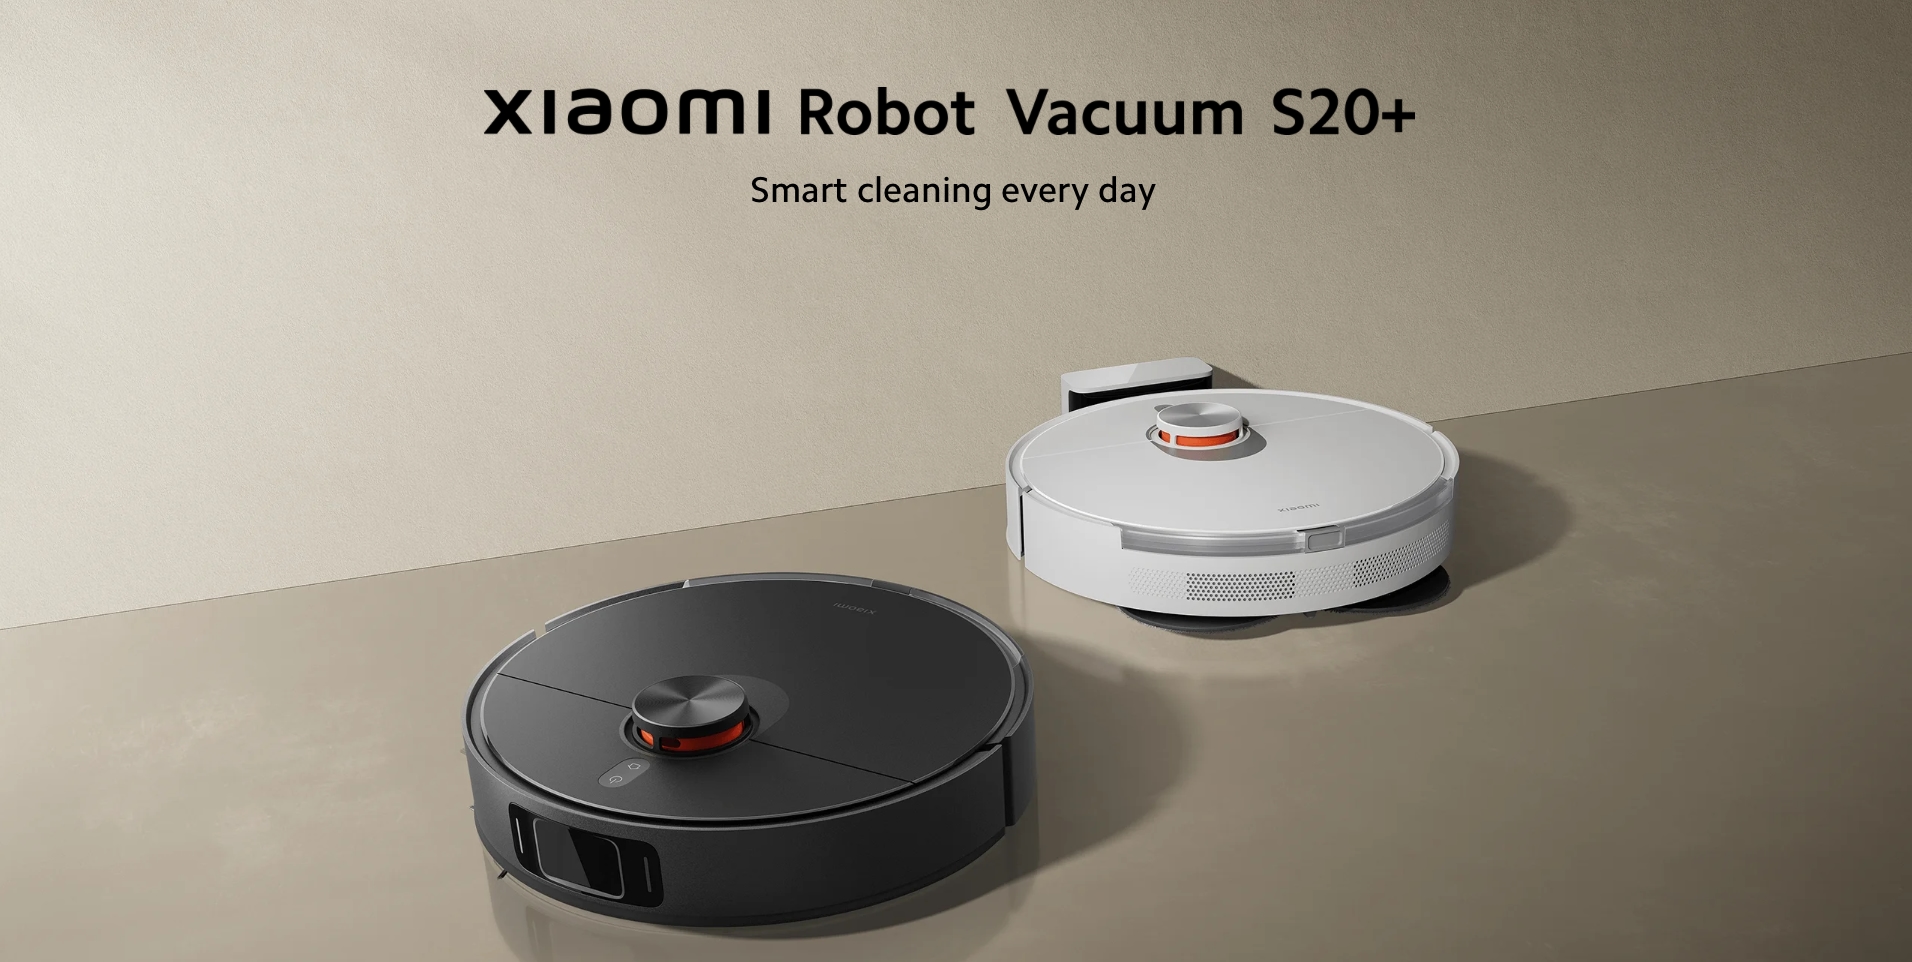 Xiaomi has introduced Robot Vacuum S20+ with two rotating brushes and LDS laser navigation in the global marketplace